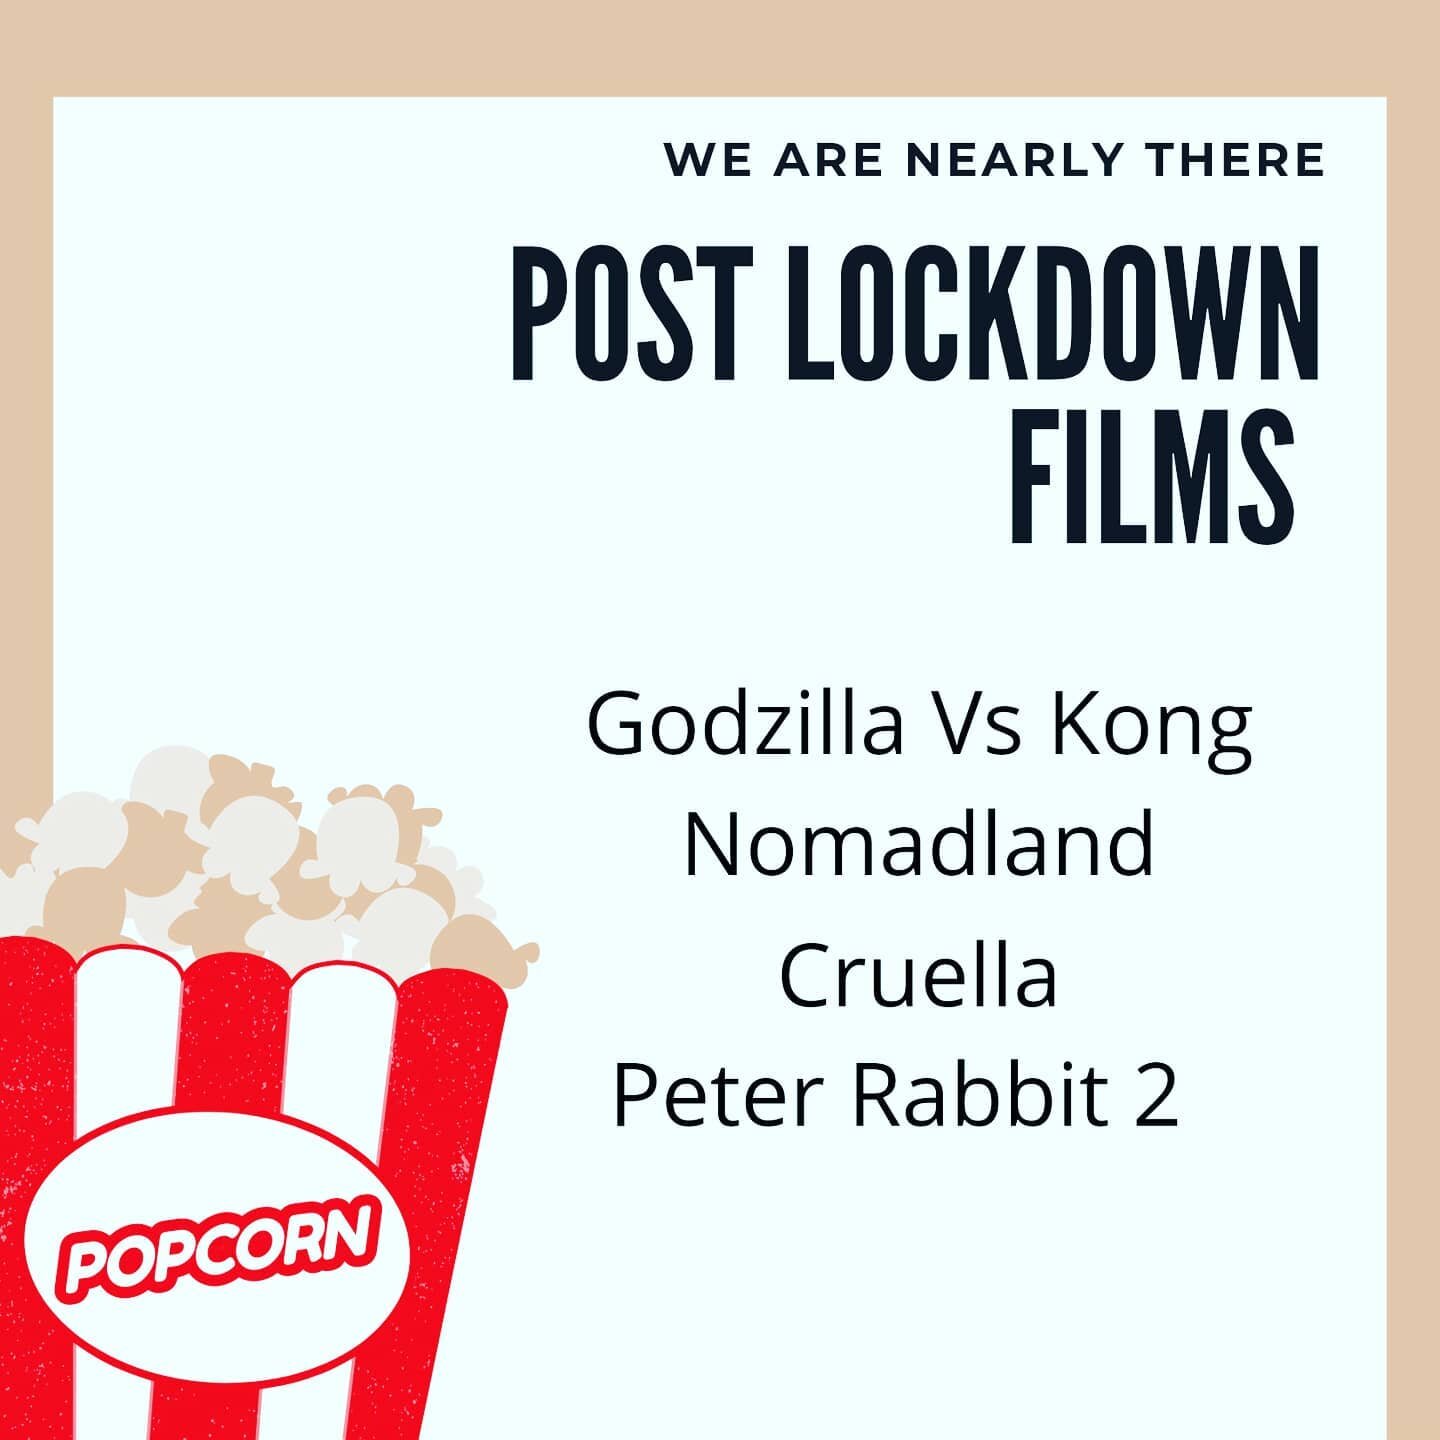 Nearly there guys!!! Check out some of the film's due out in May! And that's just for starters! #ukcinema #popcorn🍿 #lockdown #17thmay #filmnight